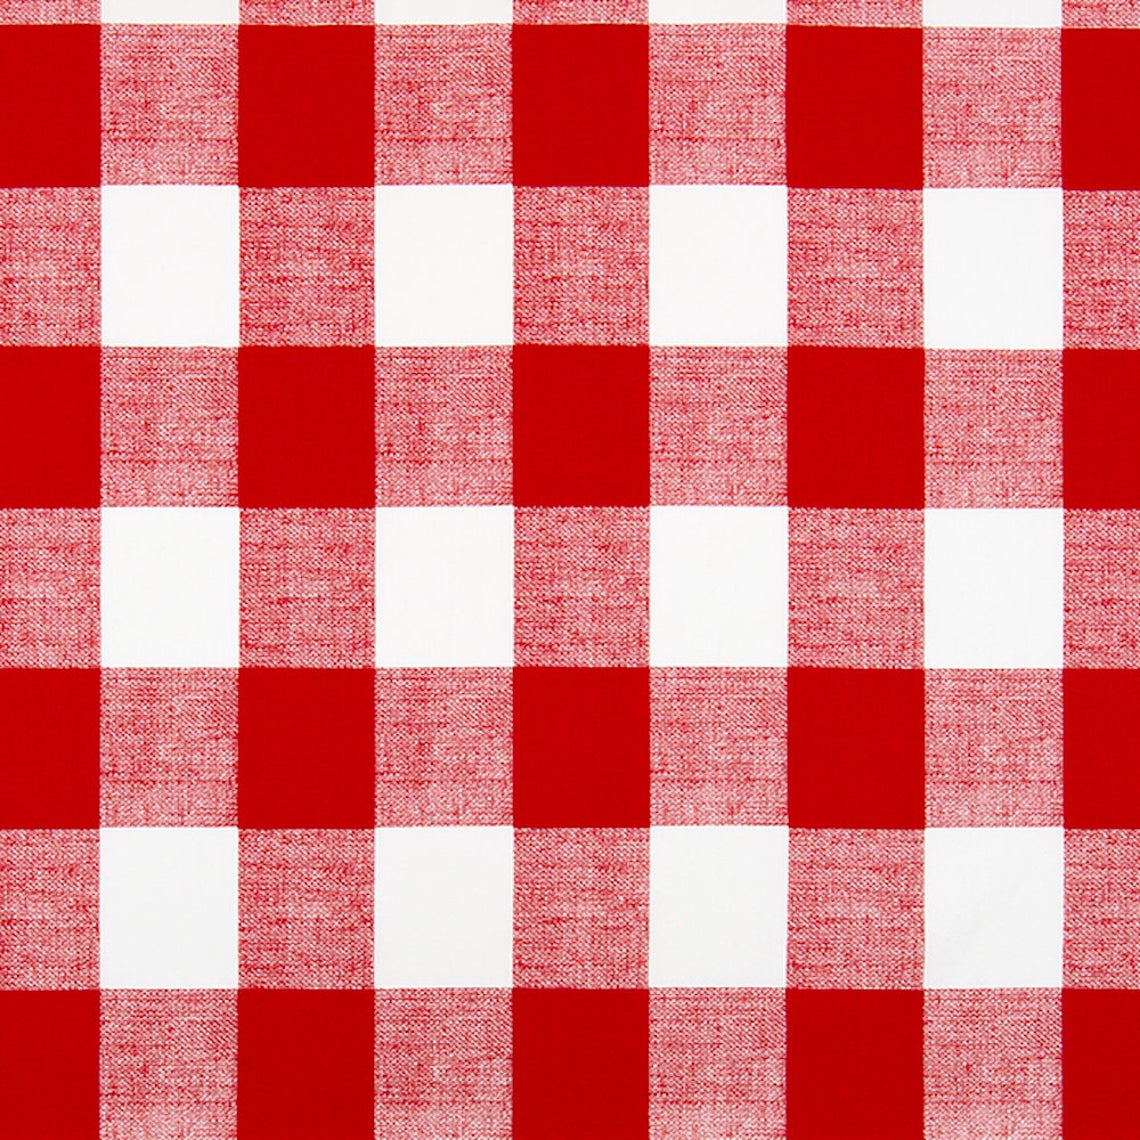 gathered bedskirt in anderson lipstick red buffalo check plaid